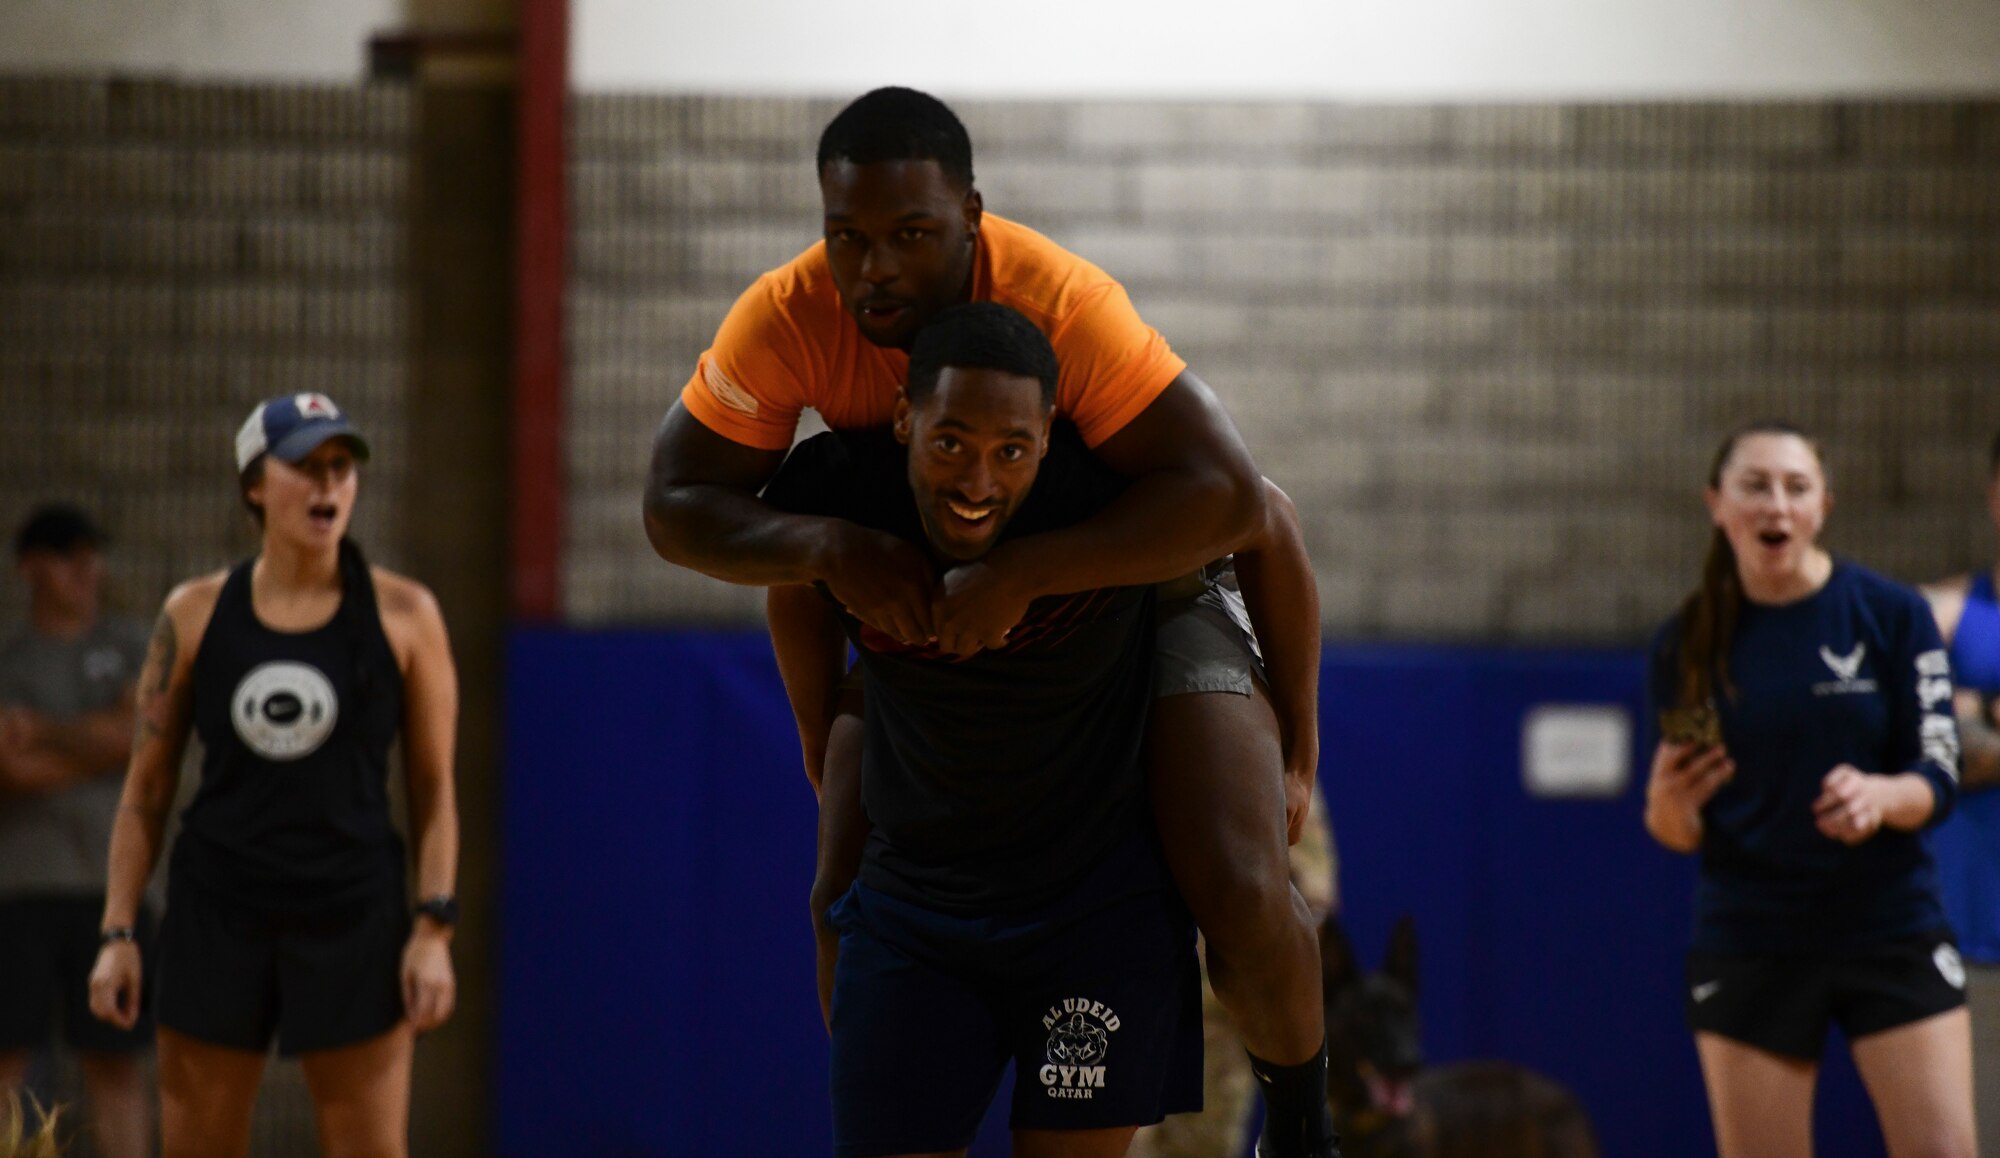 Airman carries his wingman during fitness event.